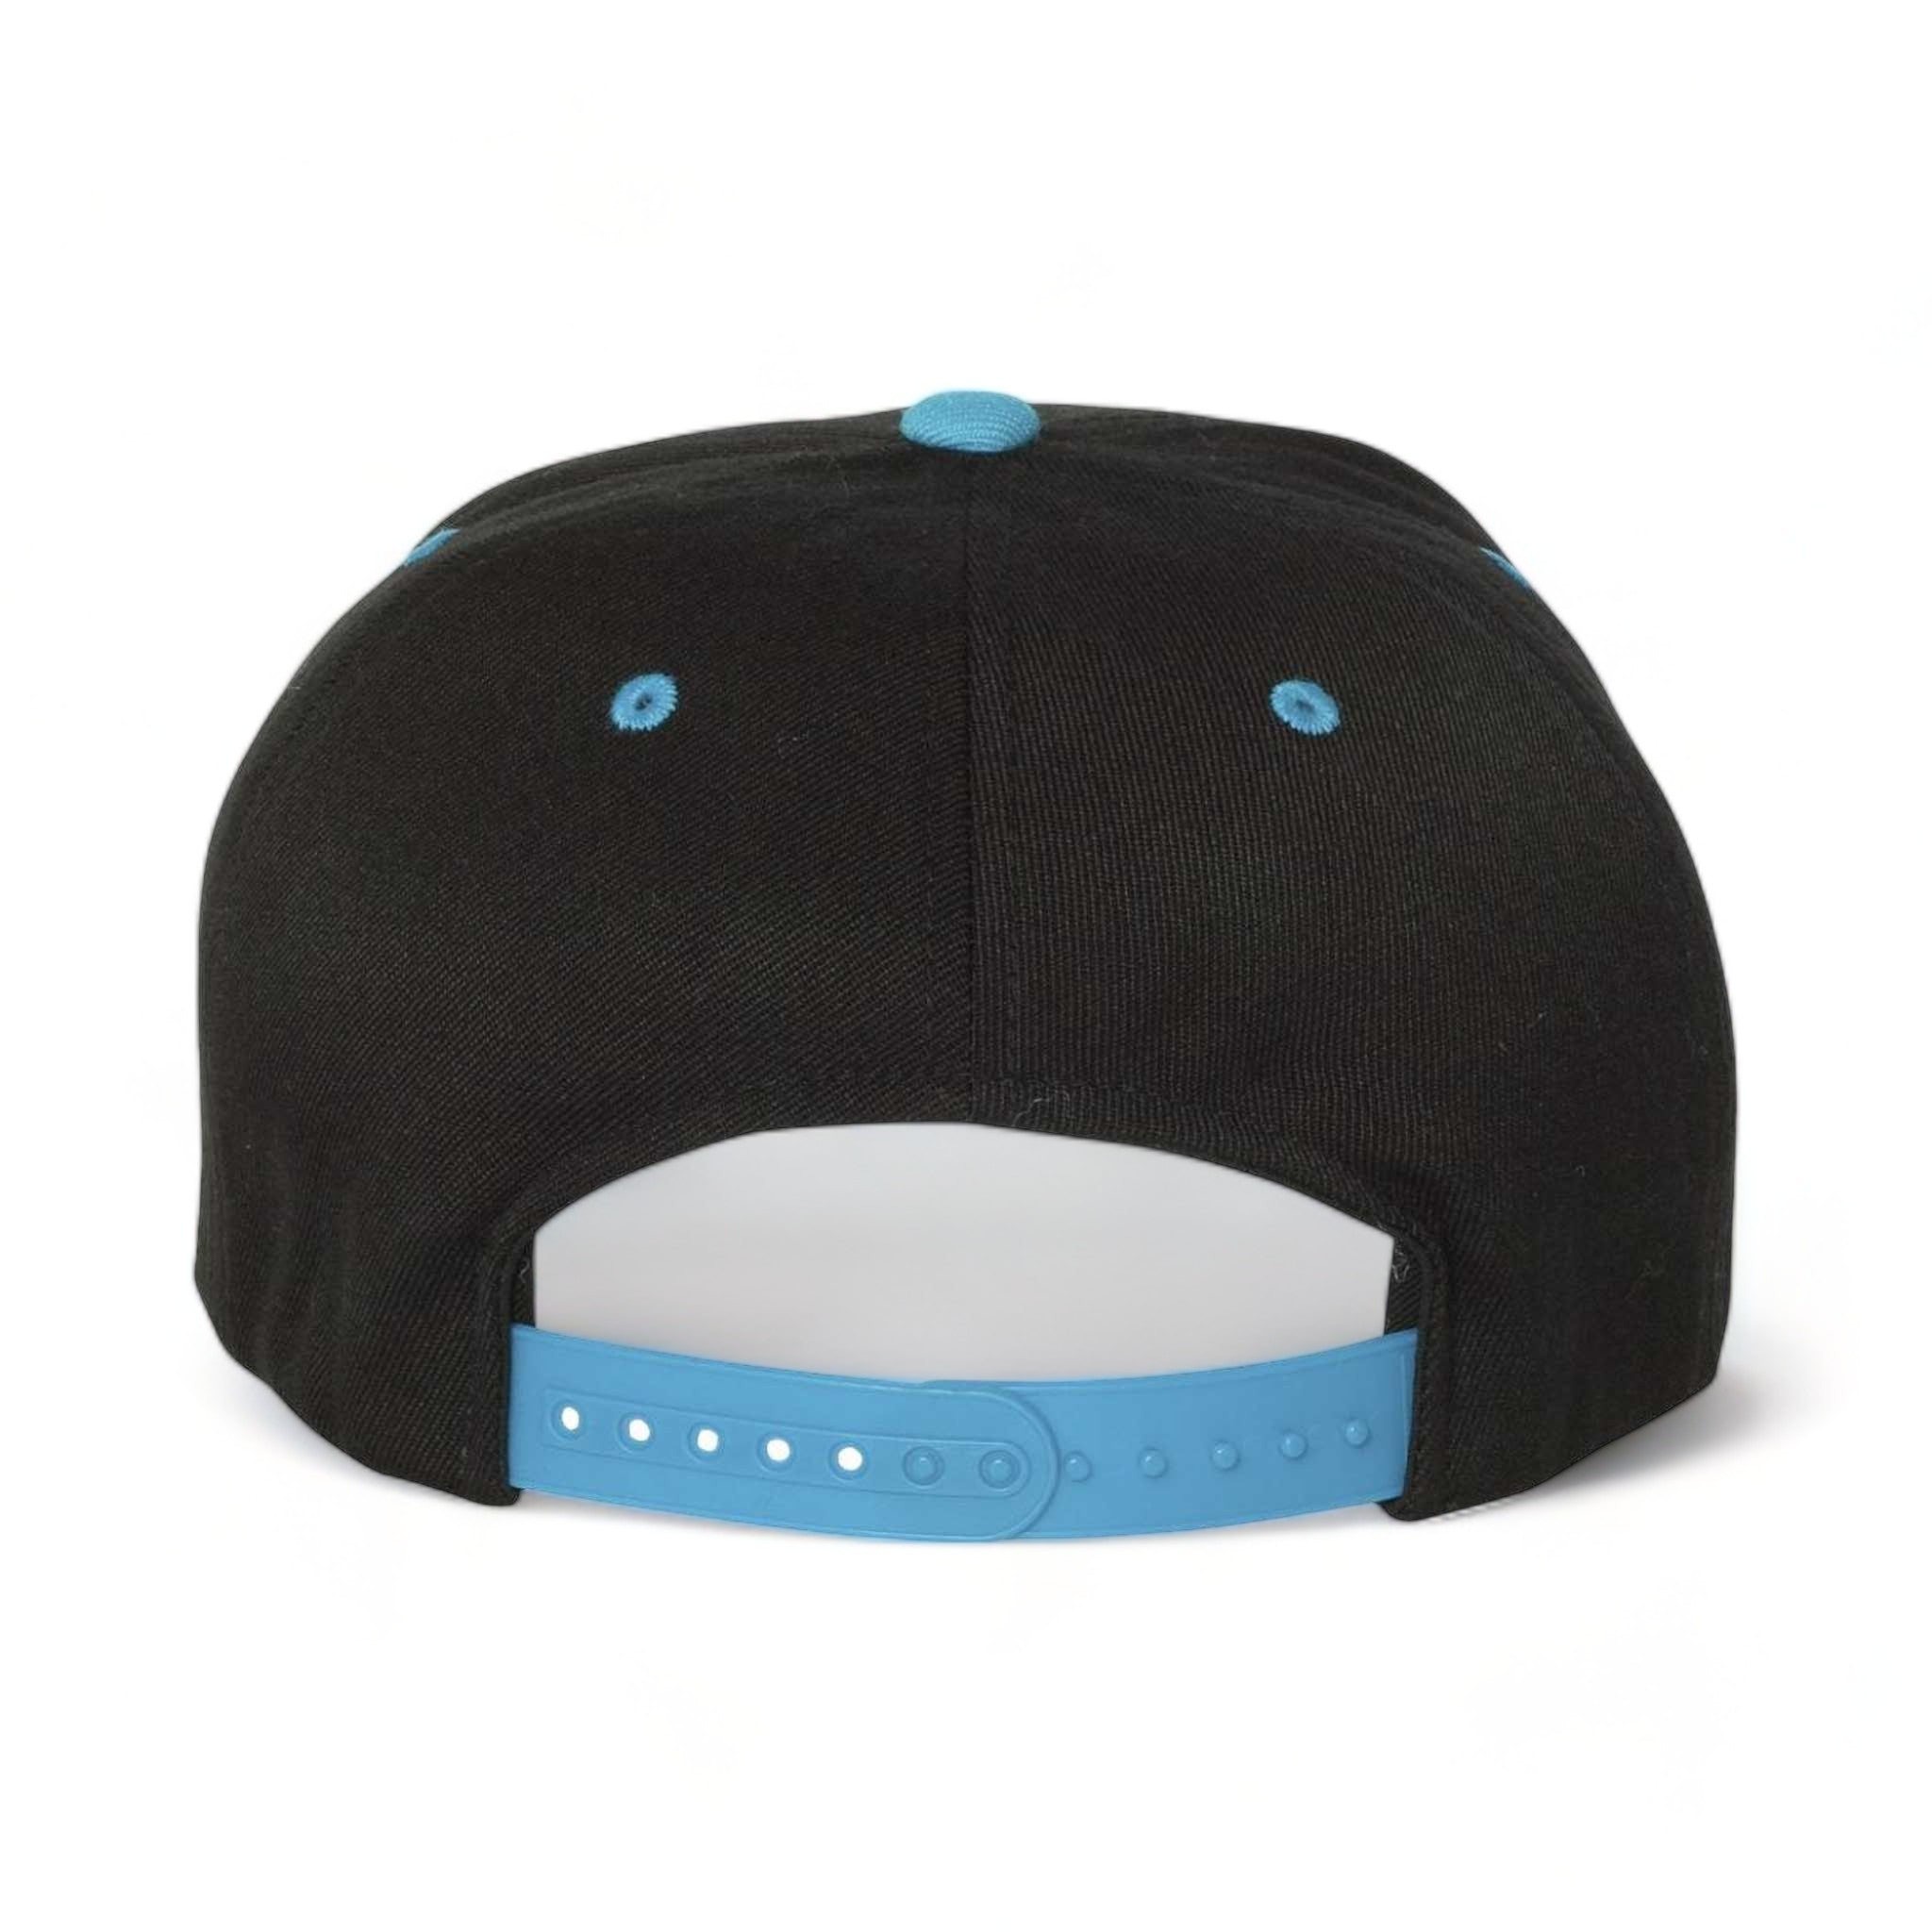 Back view of Flexfit 110F custom hat in black and teal